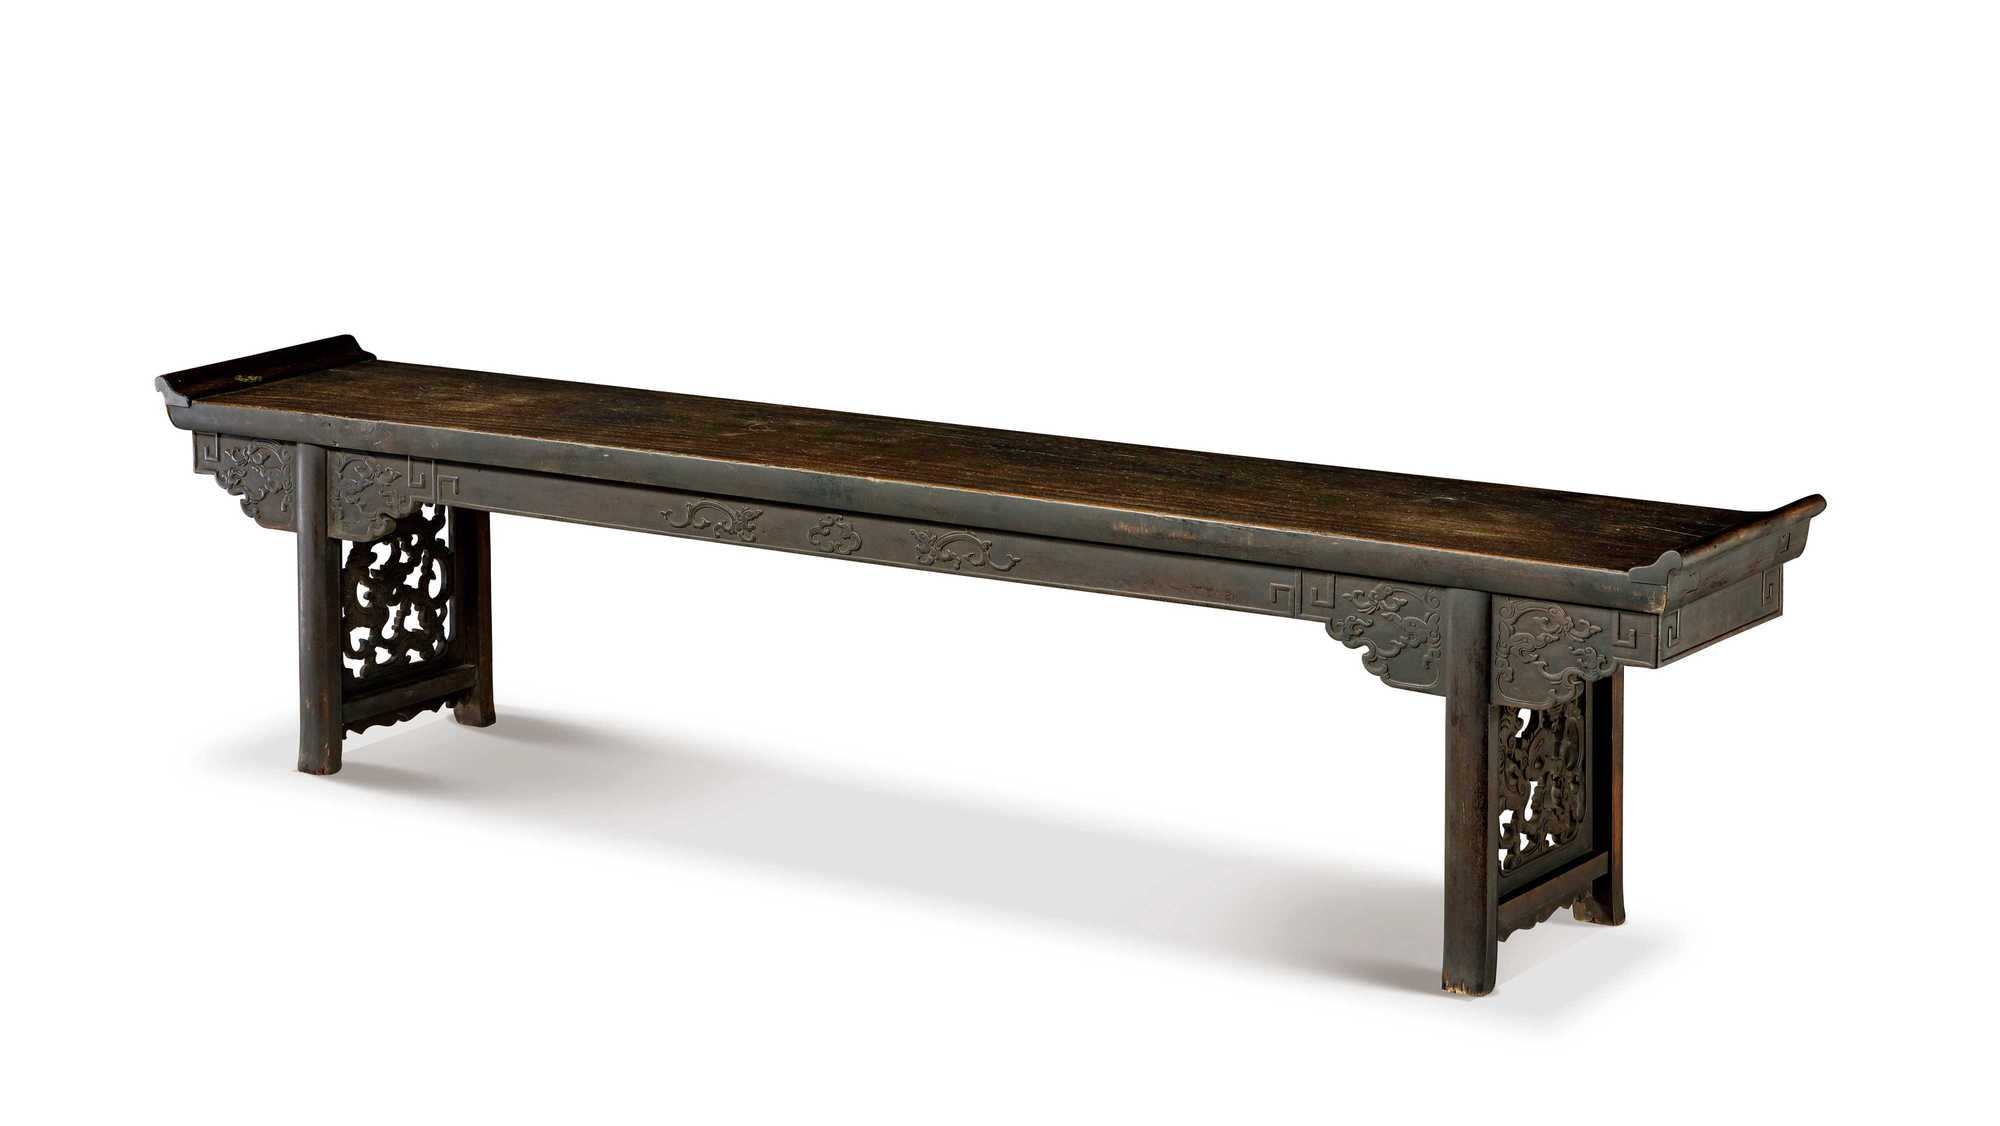 TIELIMU LARGE LONG TABLE WITH EVERTED ENDS ON A SOLID BOARD TOP IN CHILONG CARVINGS